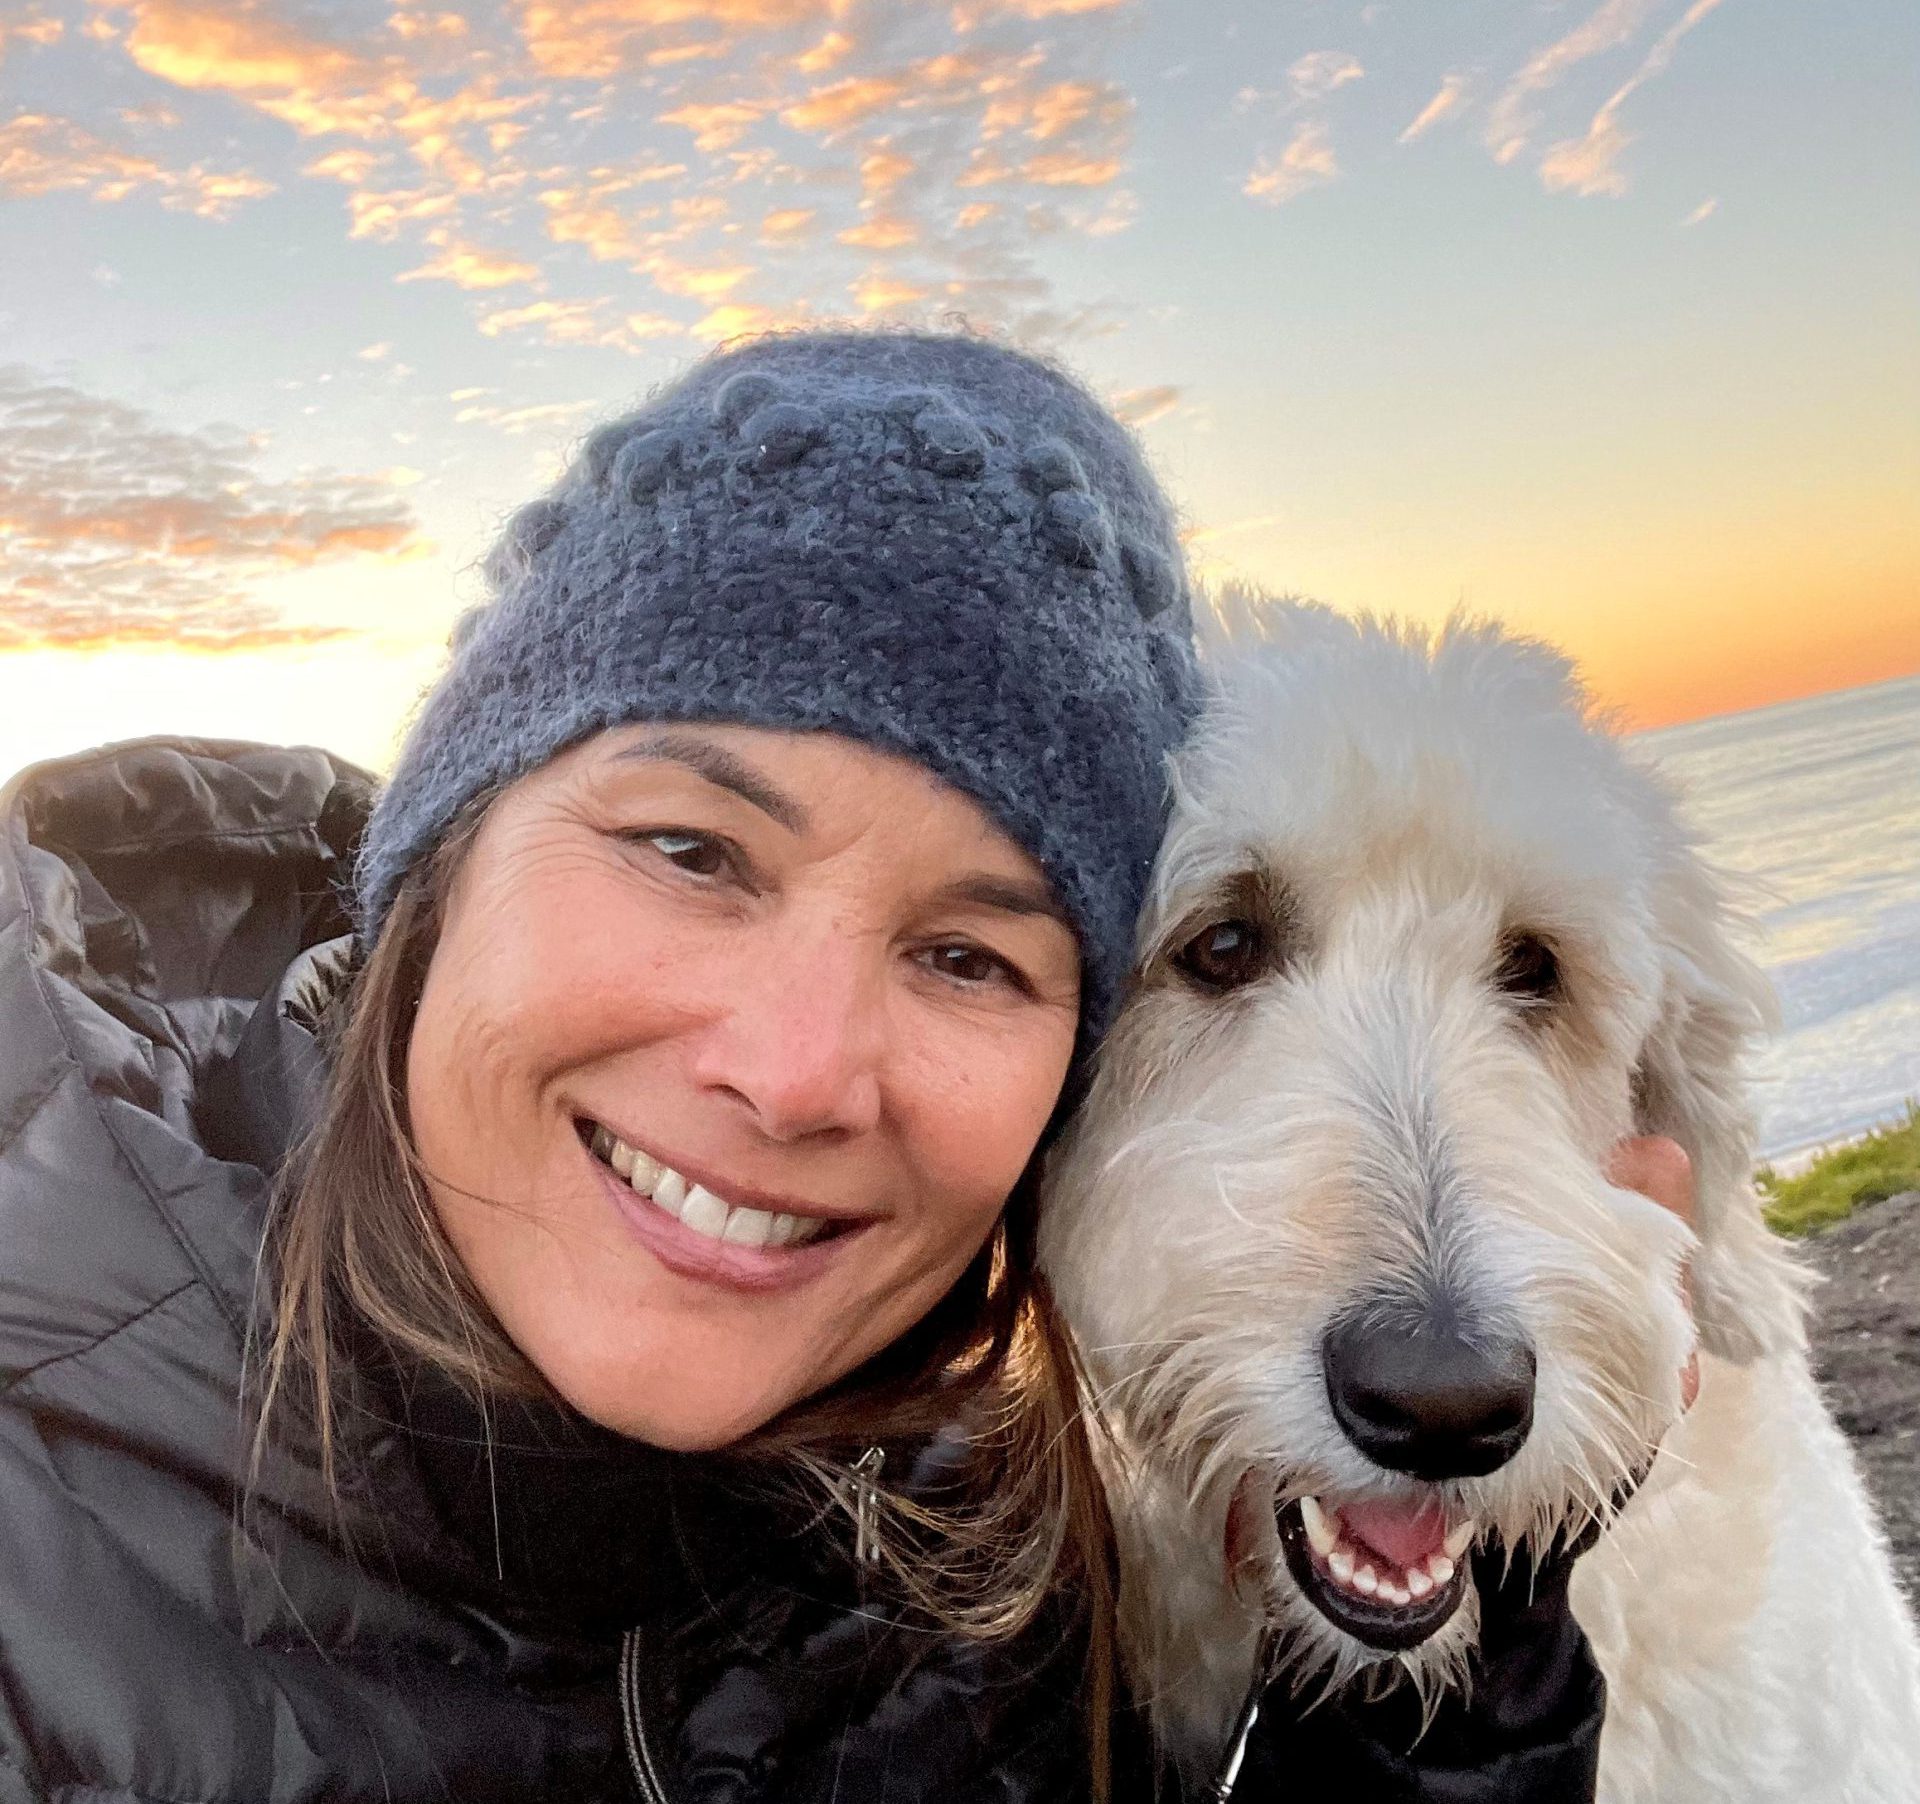 A selfie with a woman and her dog